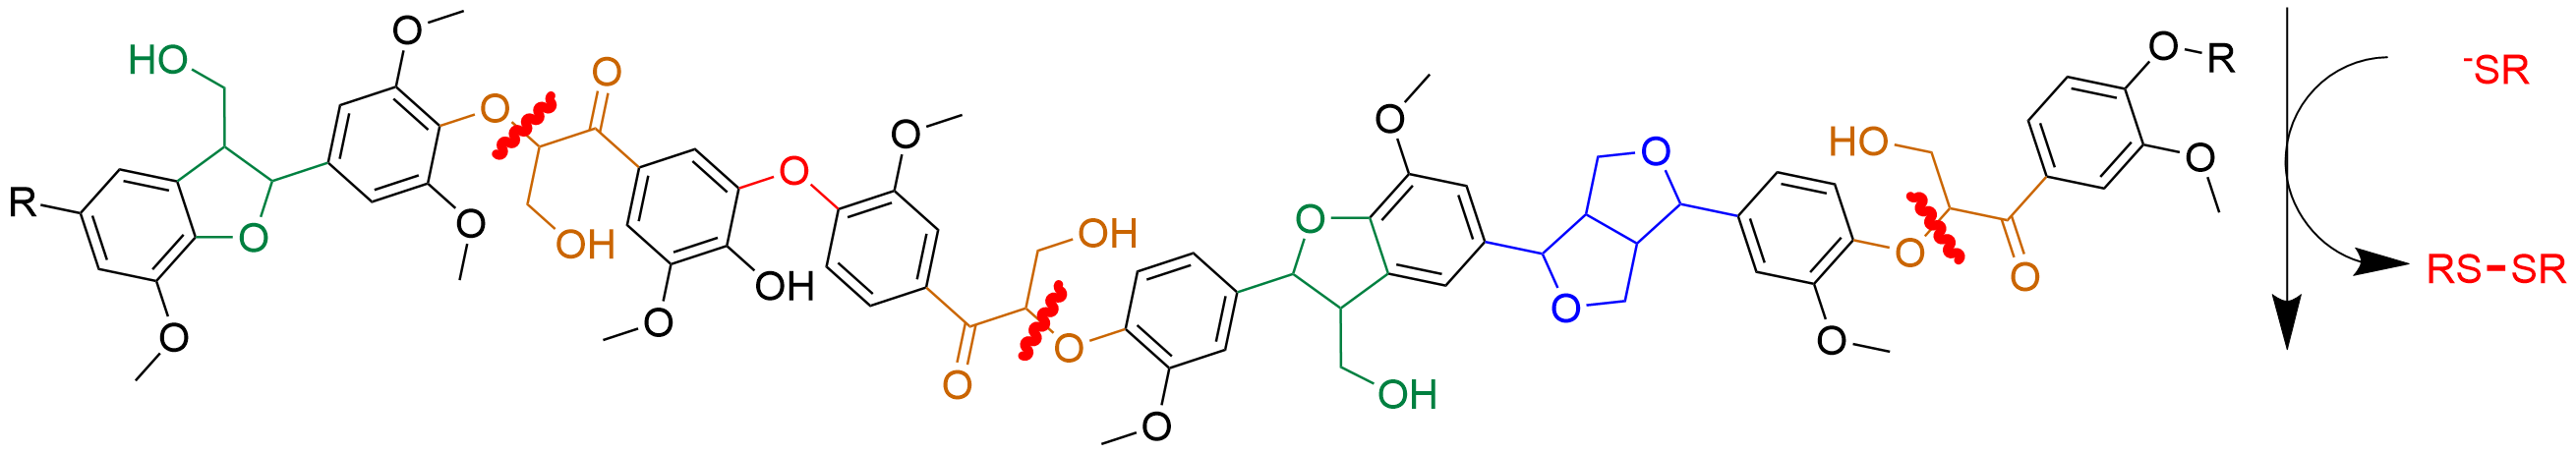 graphic of molecular structure of lignin polymer